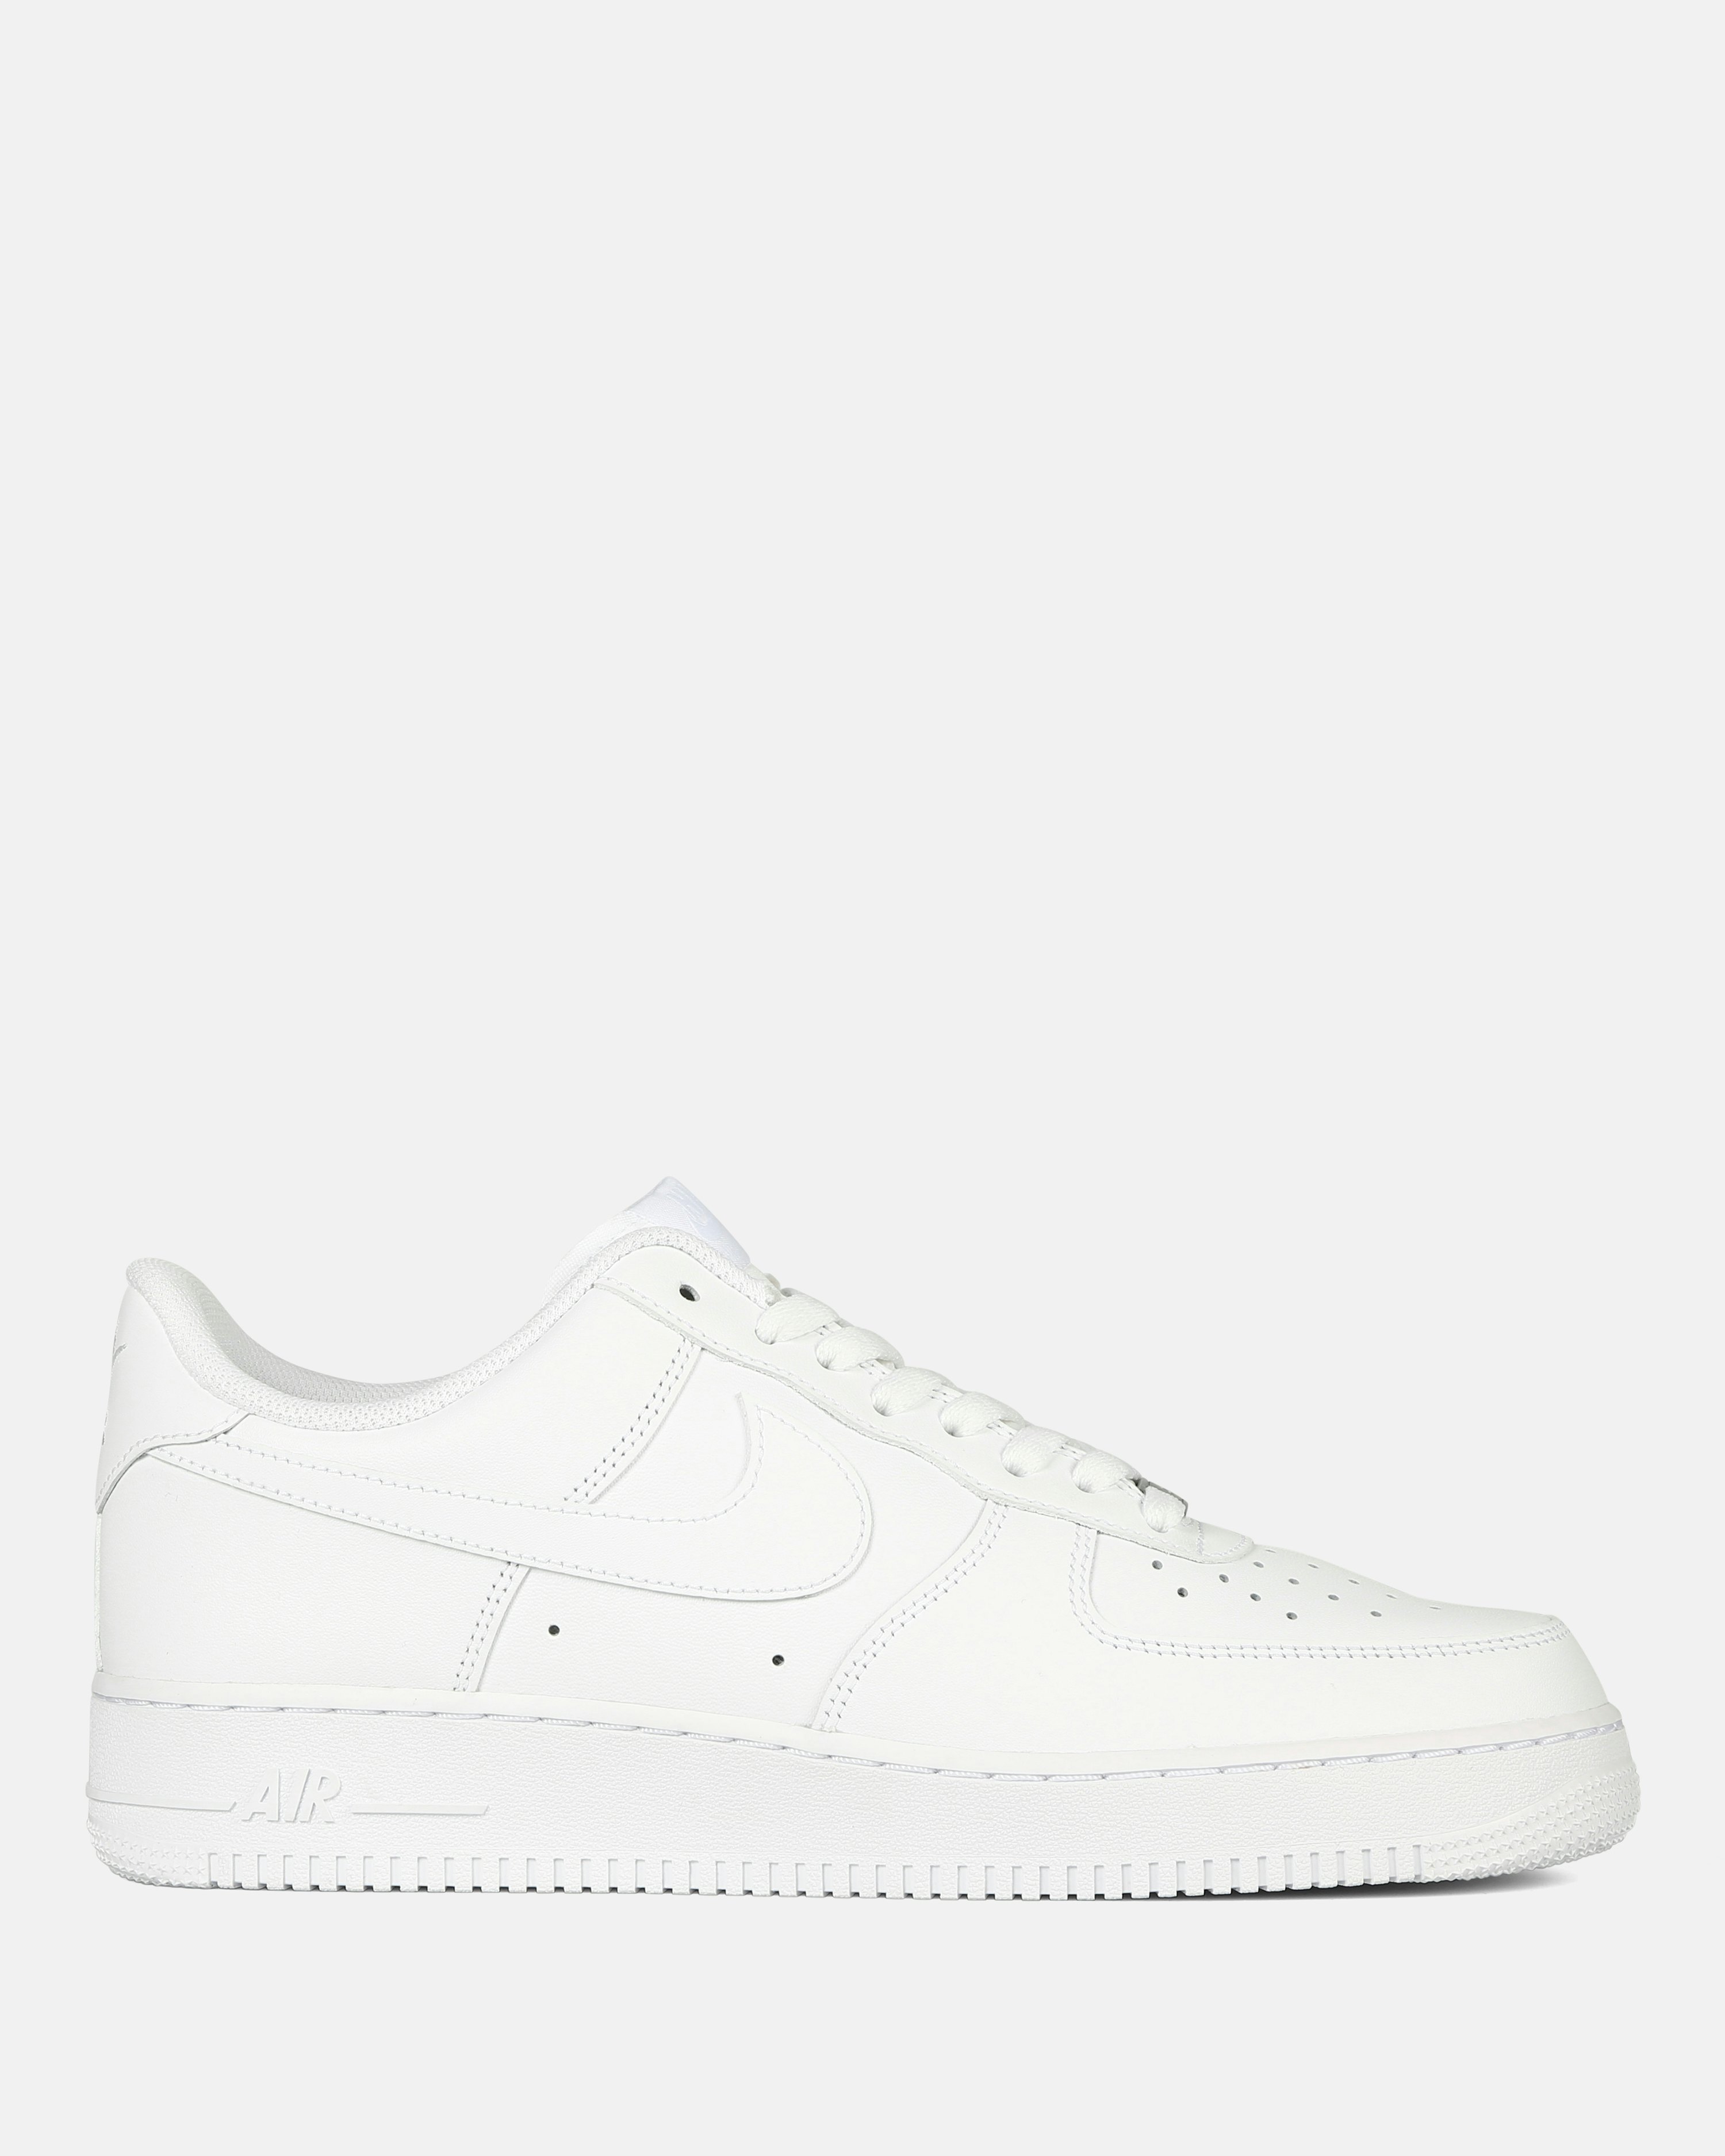 Black Nike Air Force 1 Shoes for Men - Up to 30% off